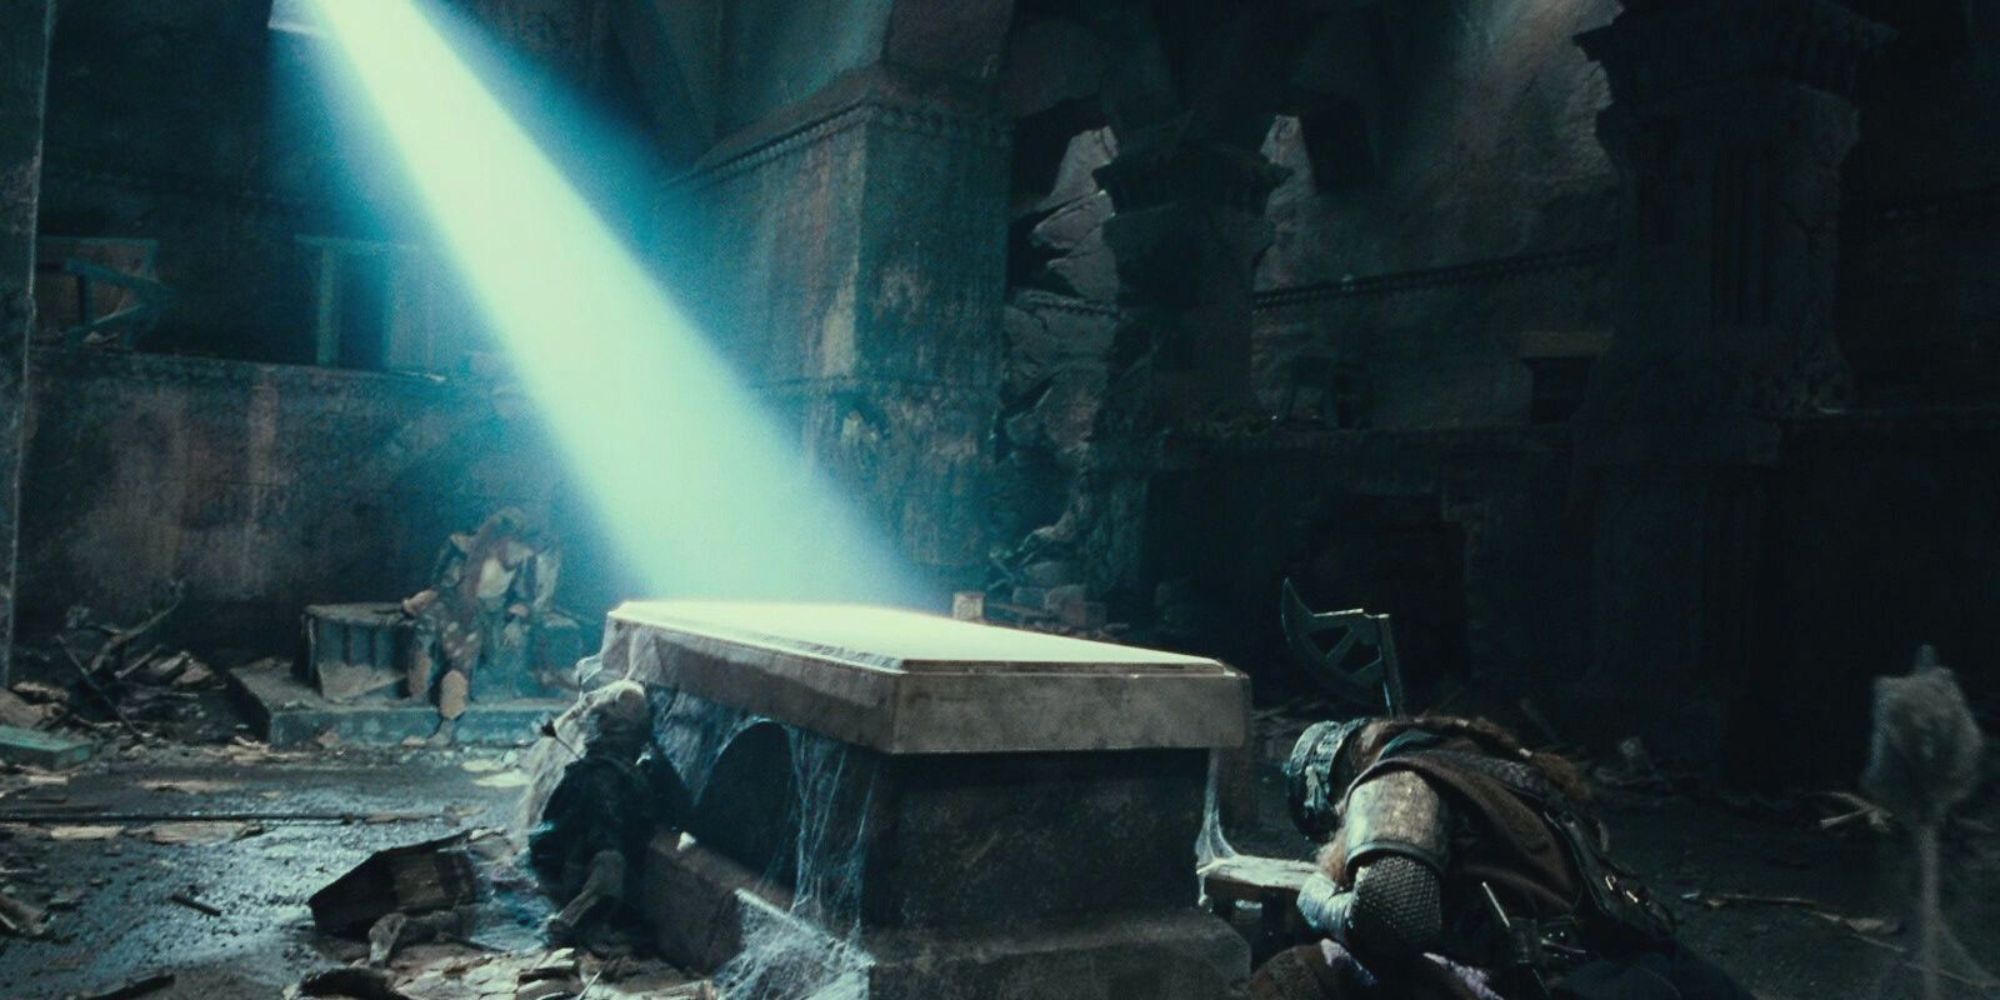 Balin's Tomb Cave Troll Scene In The Lord of the Rings: The Fellowship of the Ring